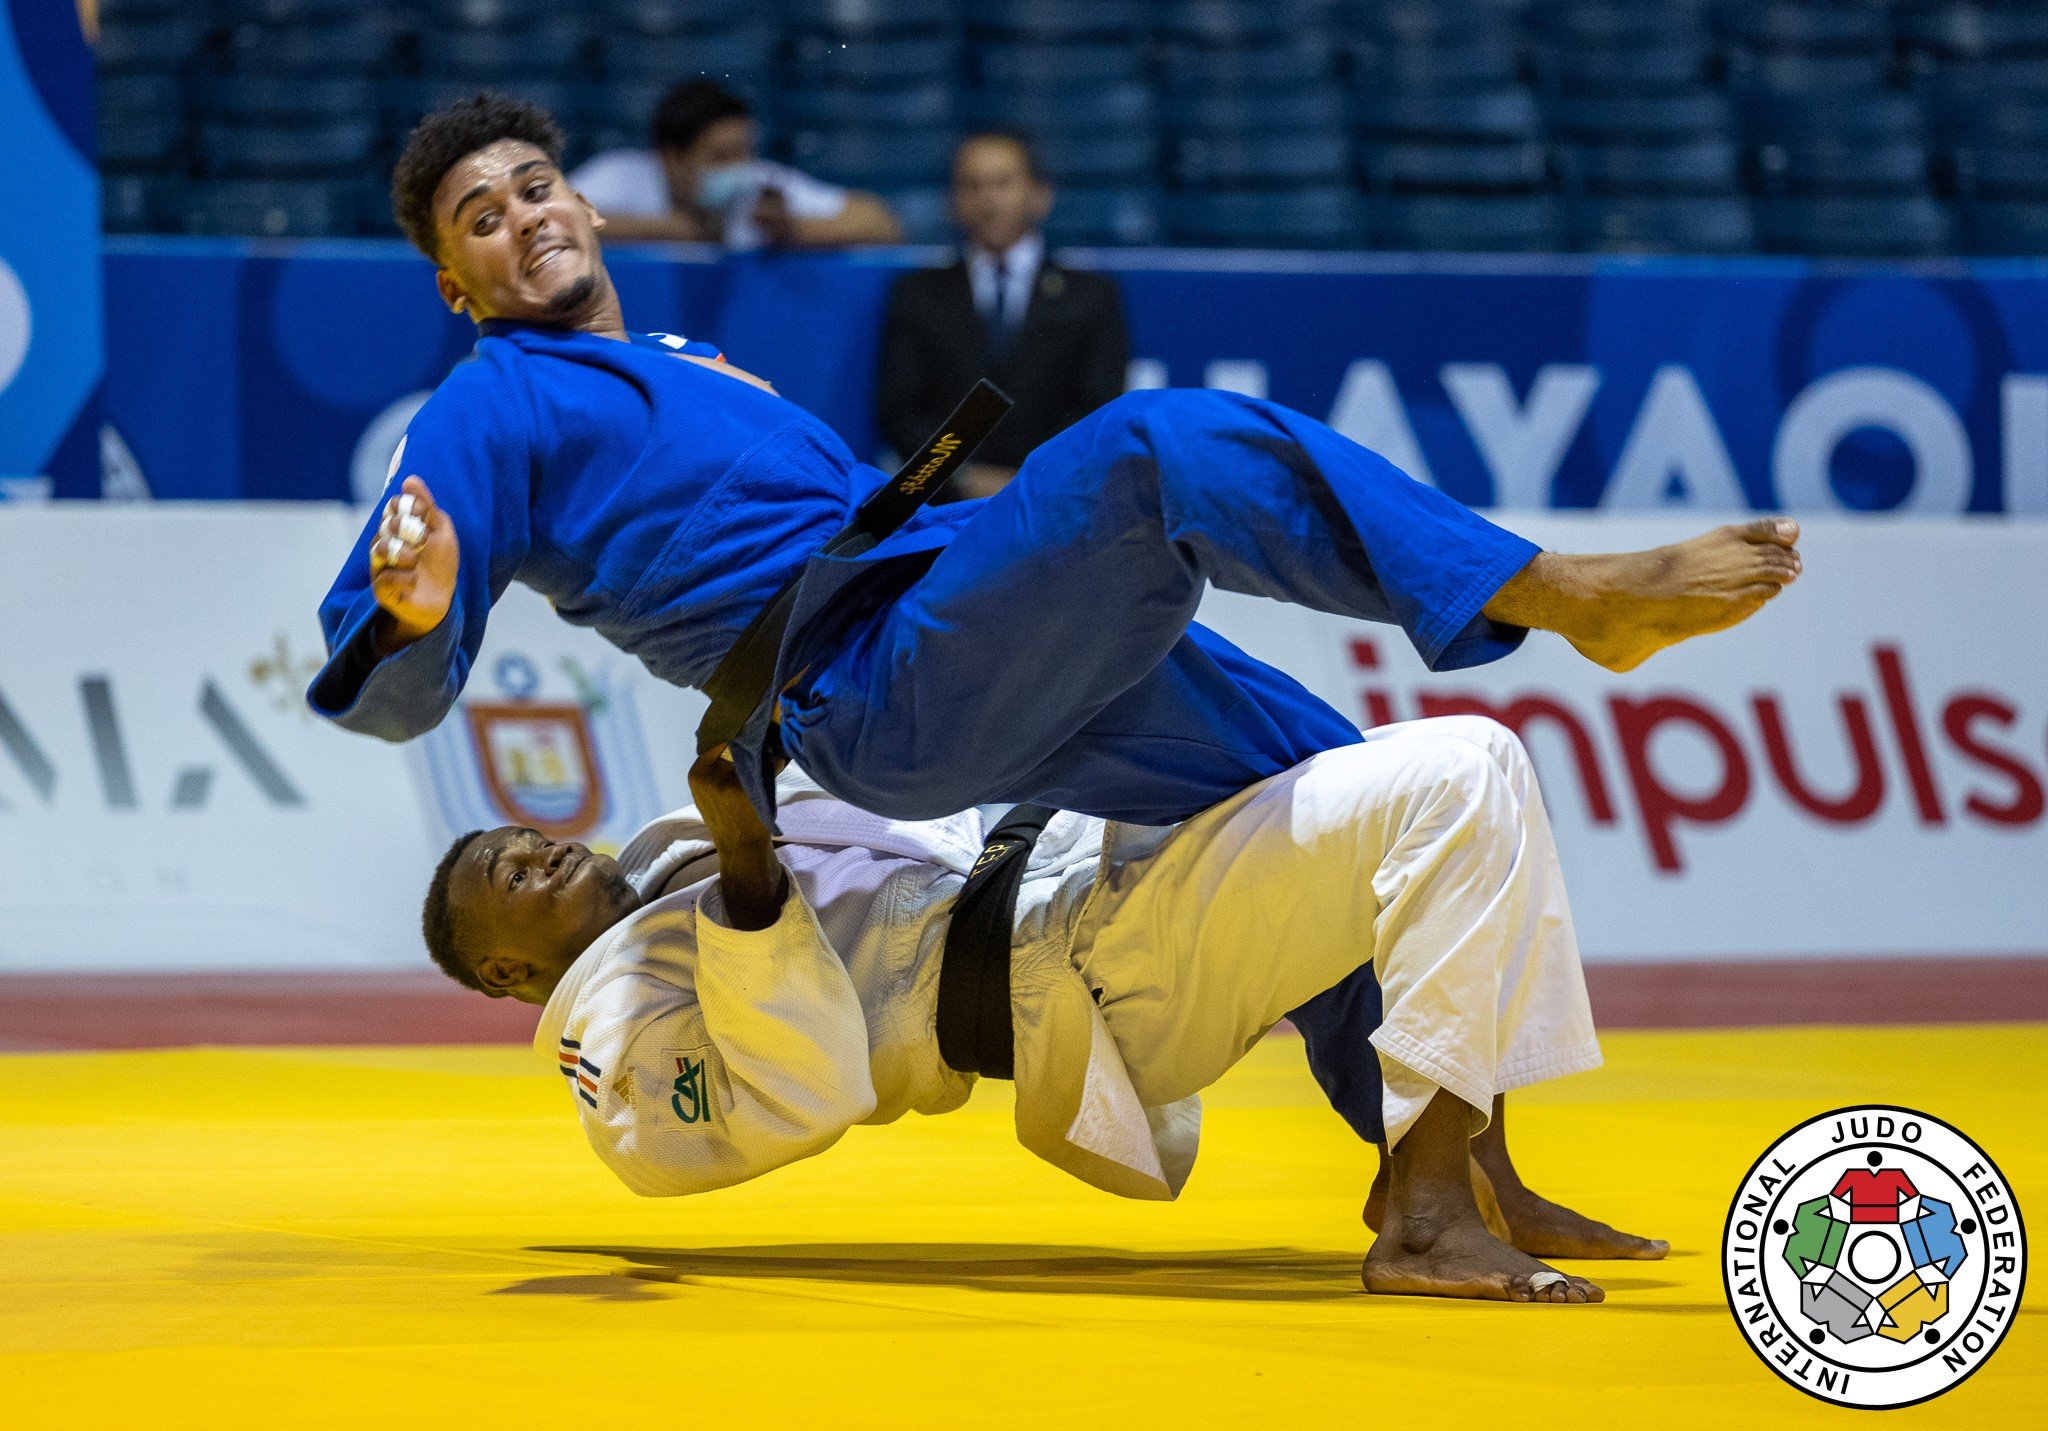 LIVEZE STUNS WITH NEAR-INSTANT IPPON FOR JUNIOR WORLD TITLE